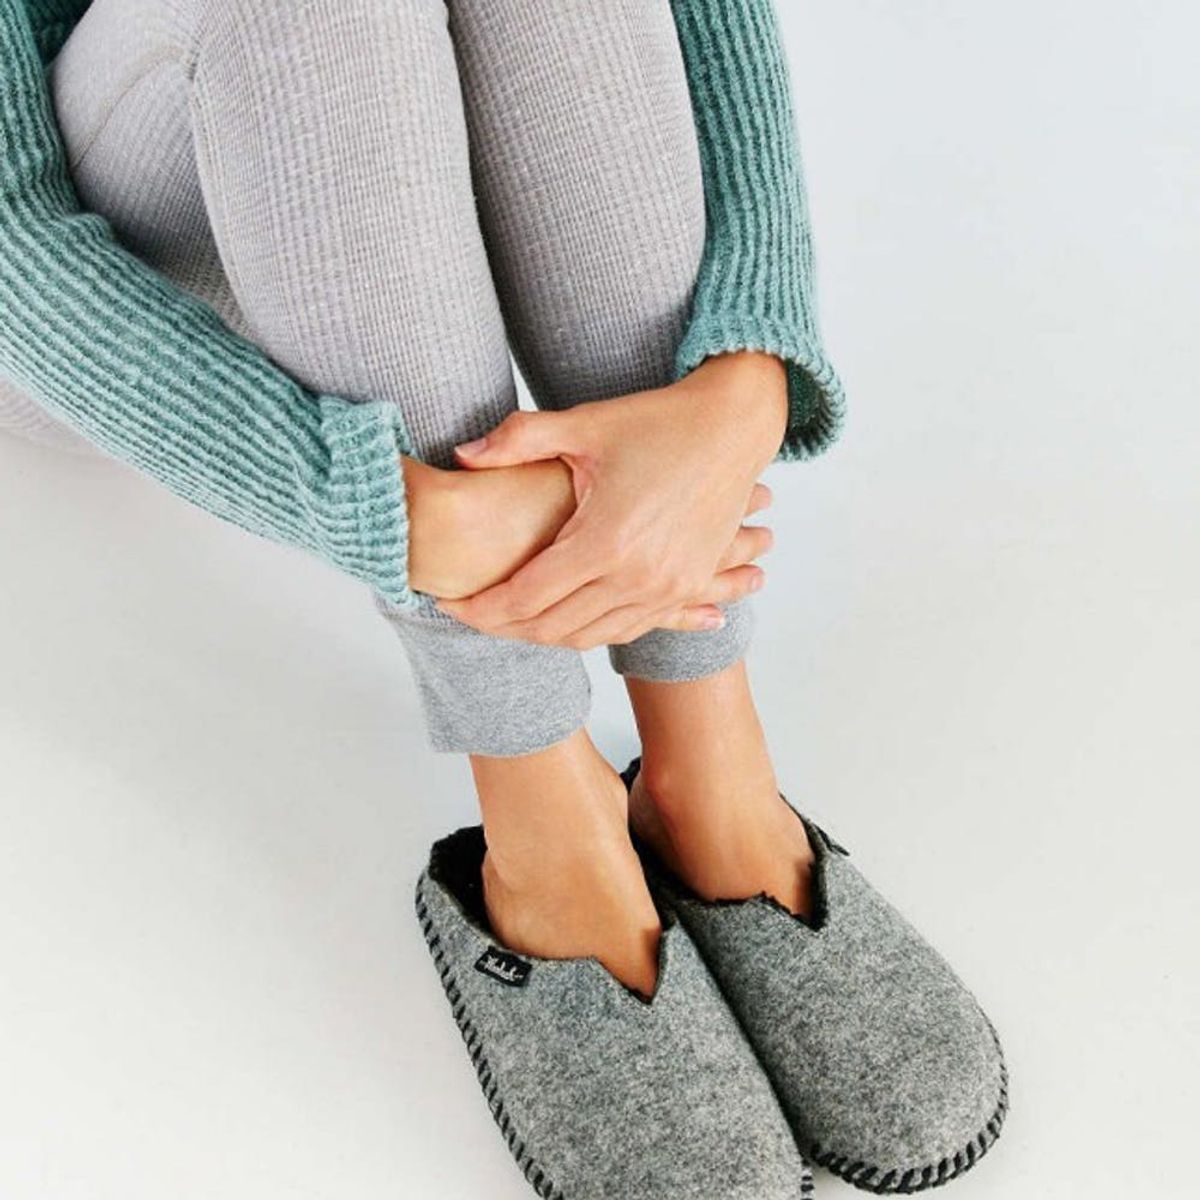 11 Things You Need to Get Your Apartment Ready for Cold Weather